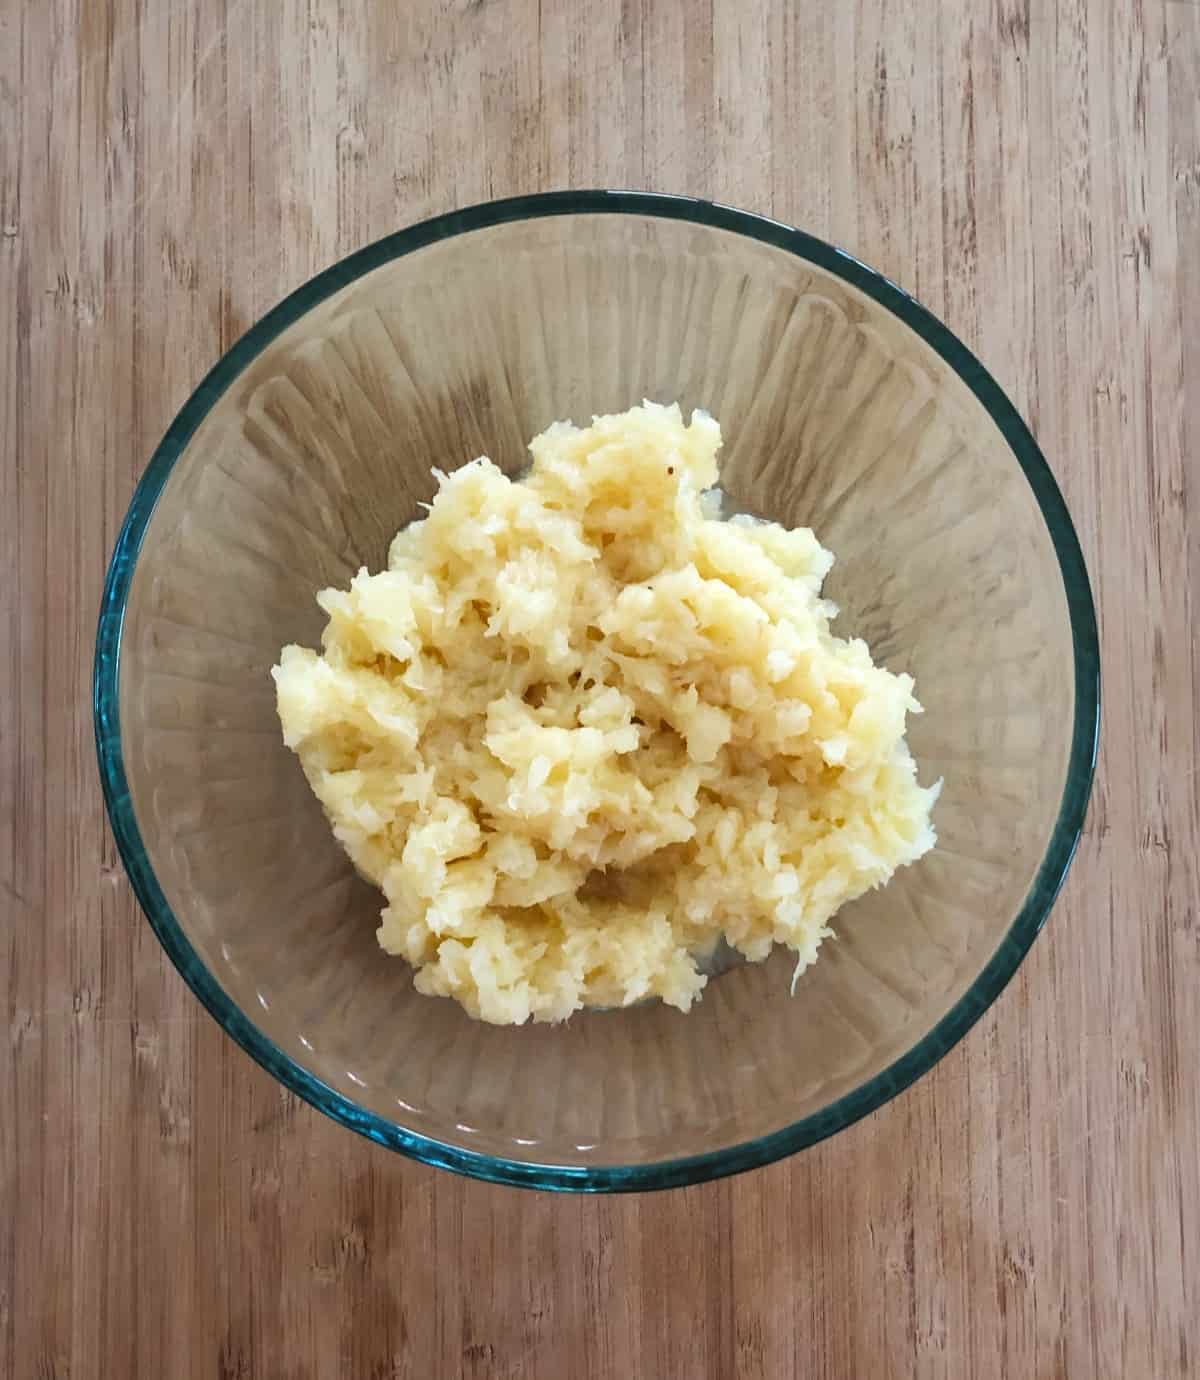 Glass mixing bowl with crushed pineapple on bamboo